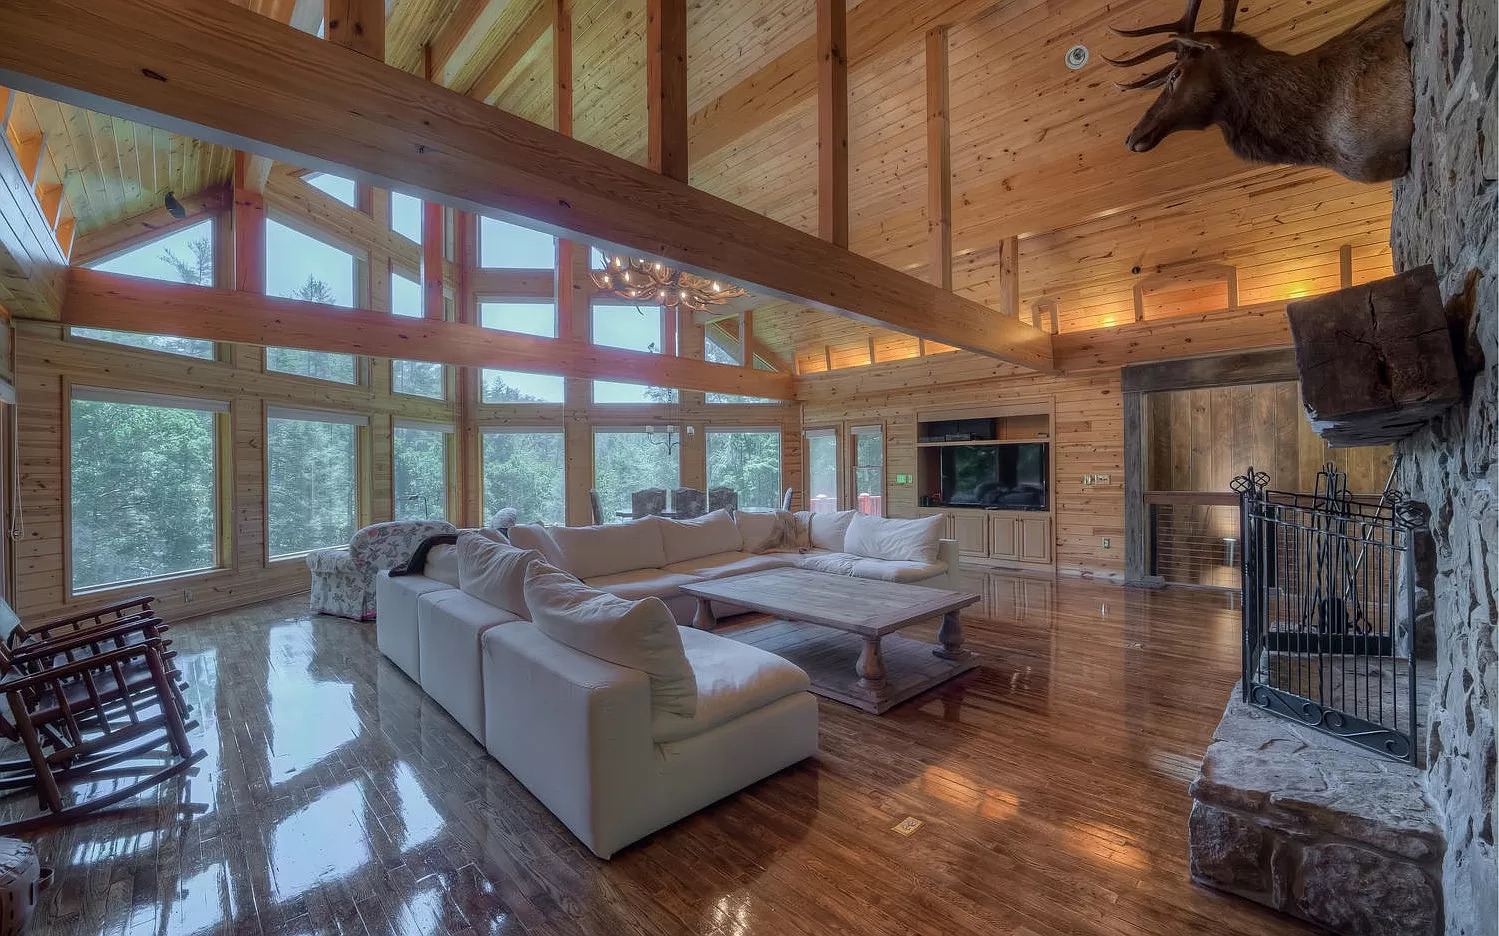 A large cabin living room with wood floors